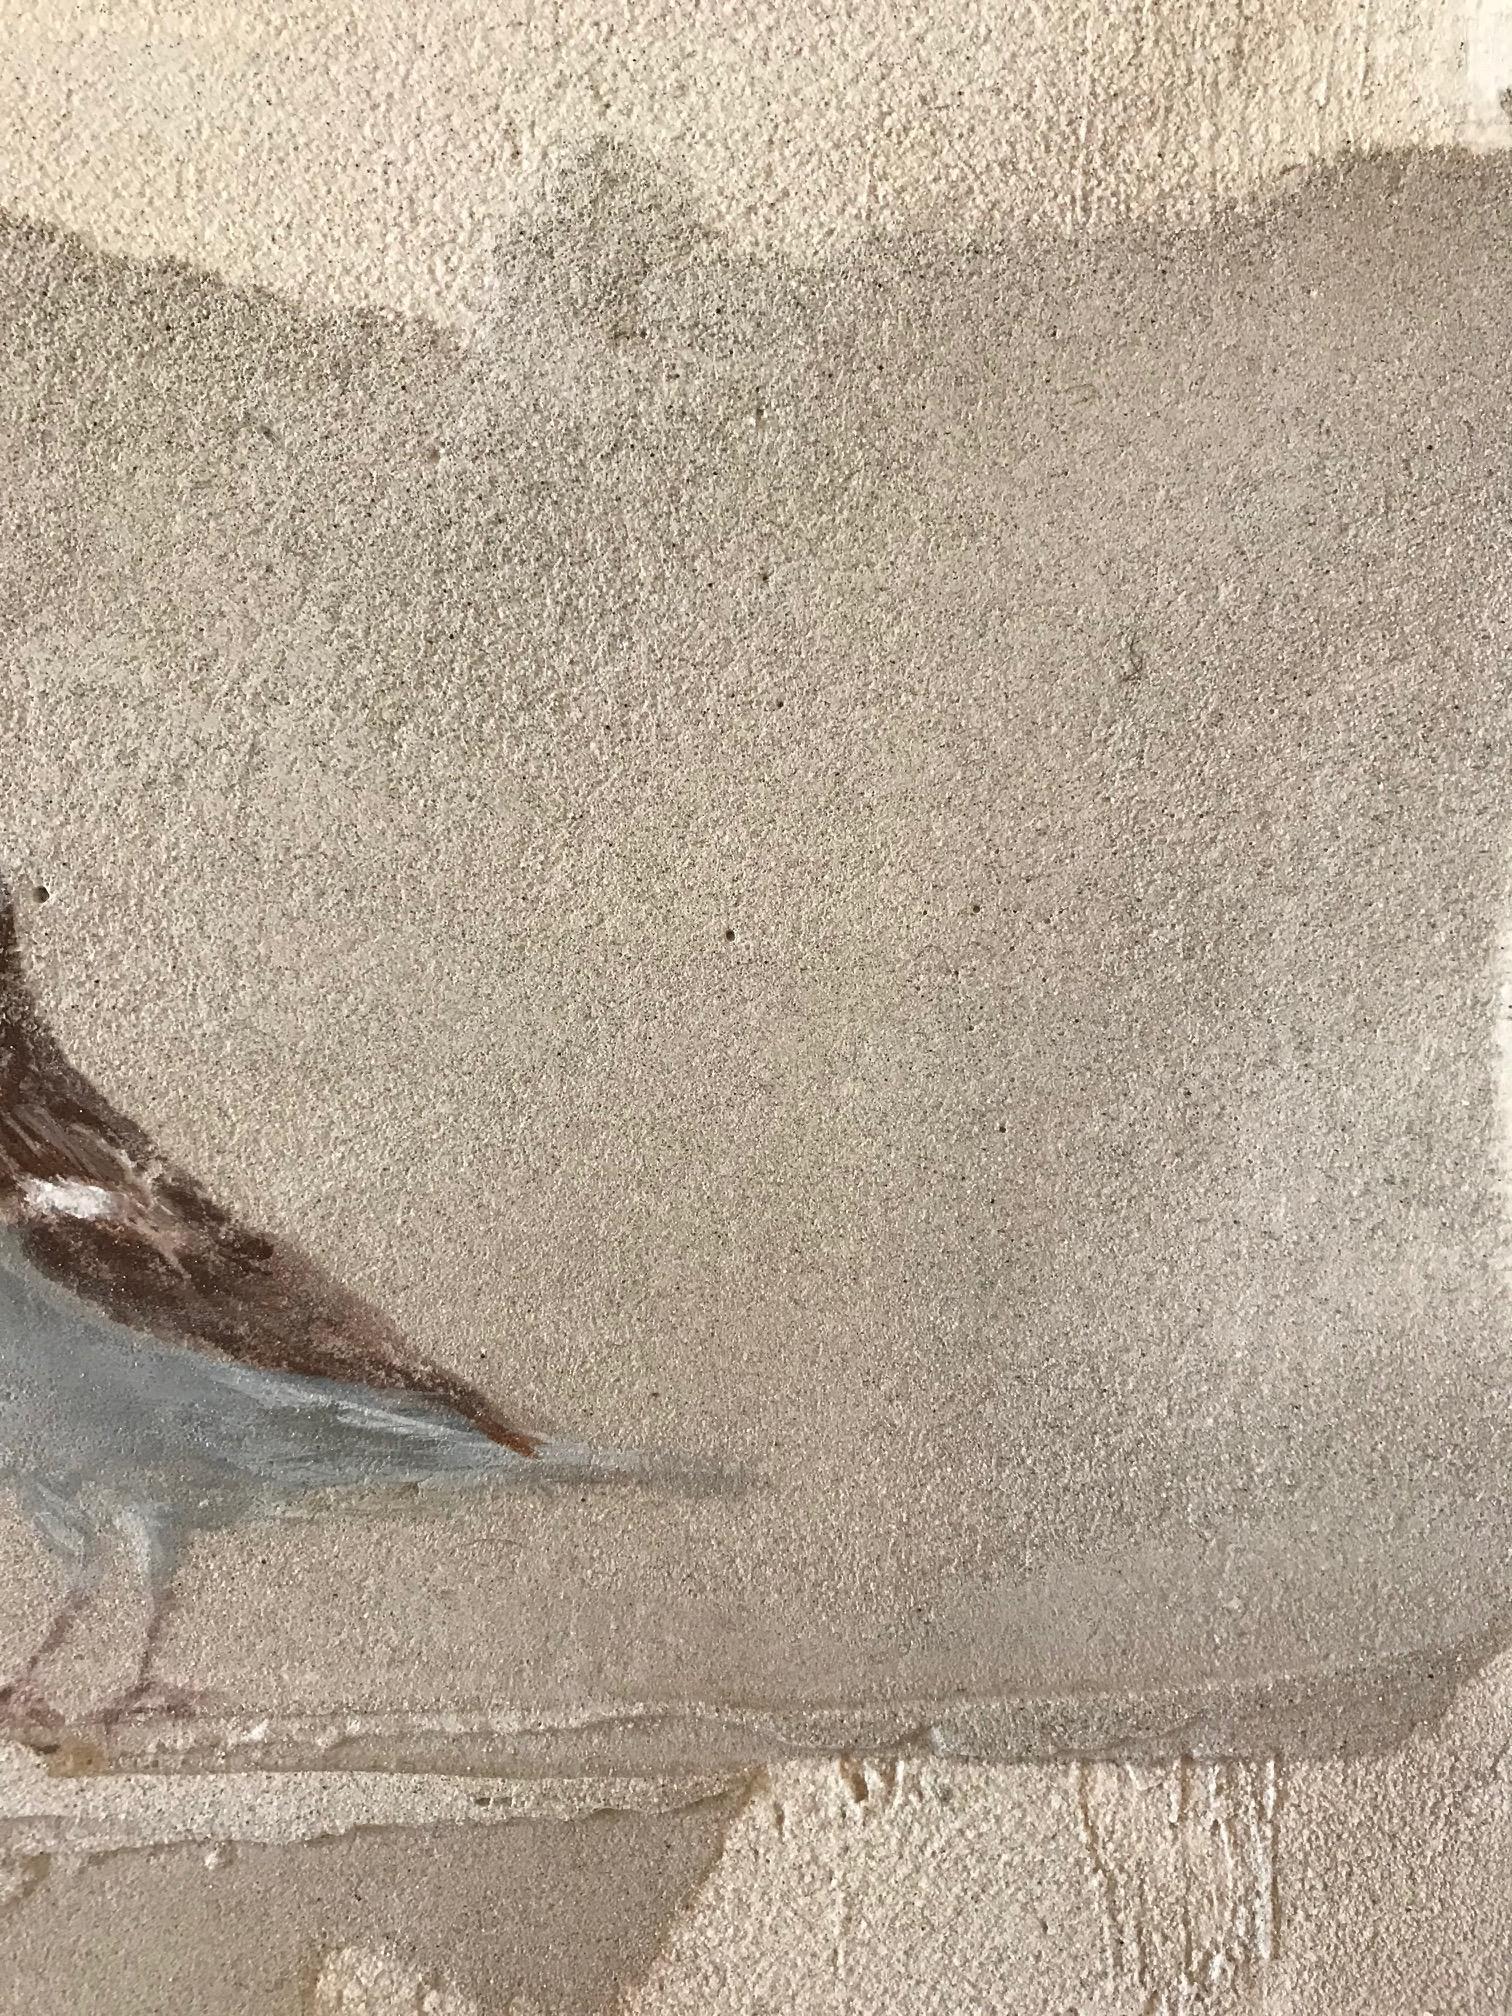 ''Sparrow'' Dutch Contemporary Fresco Painting with Sparrow, Birds - Gray Figurative Painting by Jan Grotenbreg